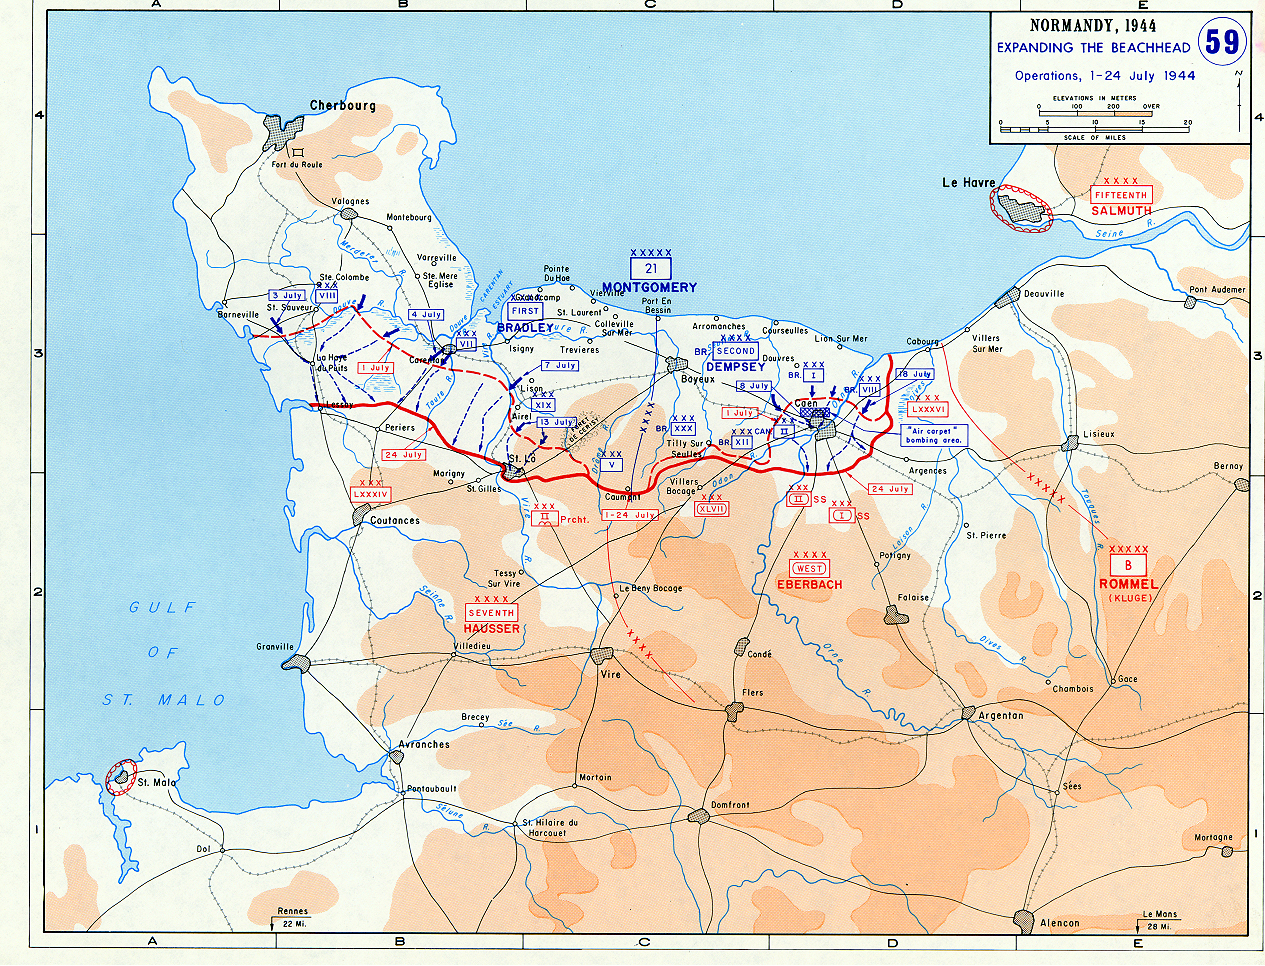 Map Map depicting the Allied attempt to expand the beachhead at